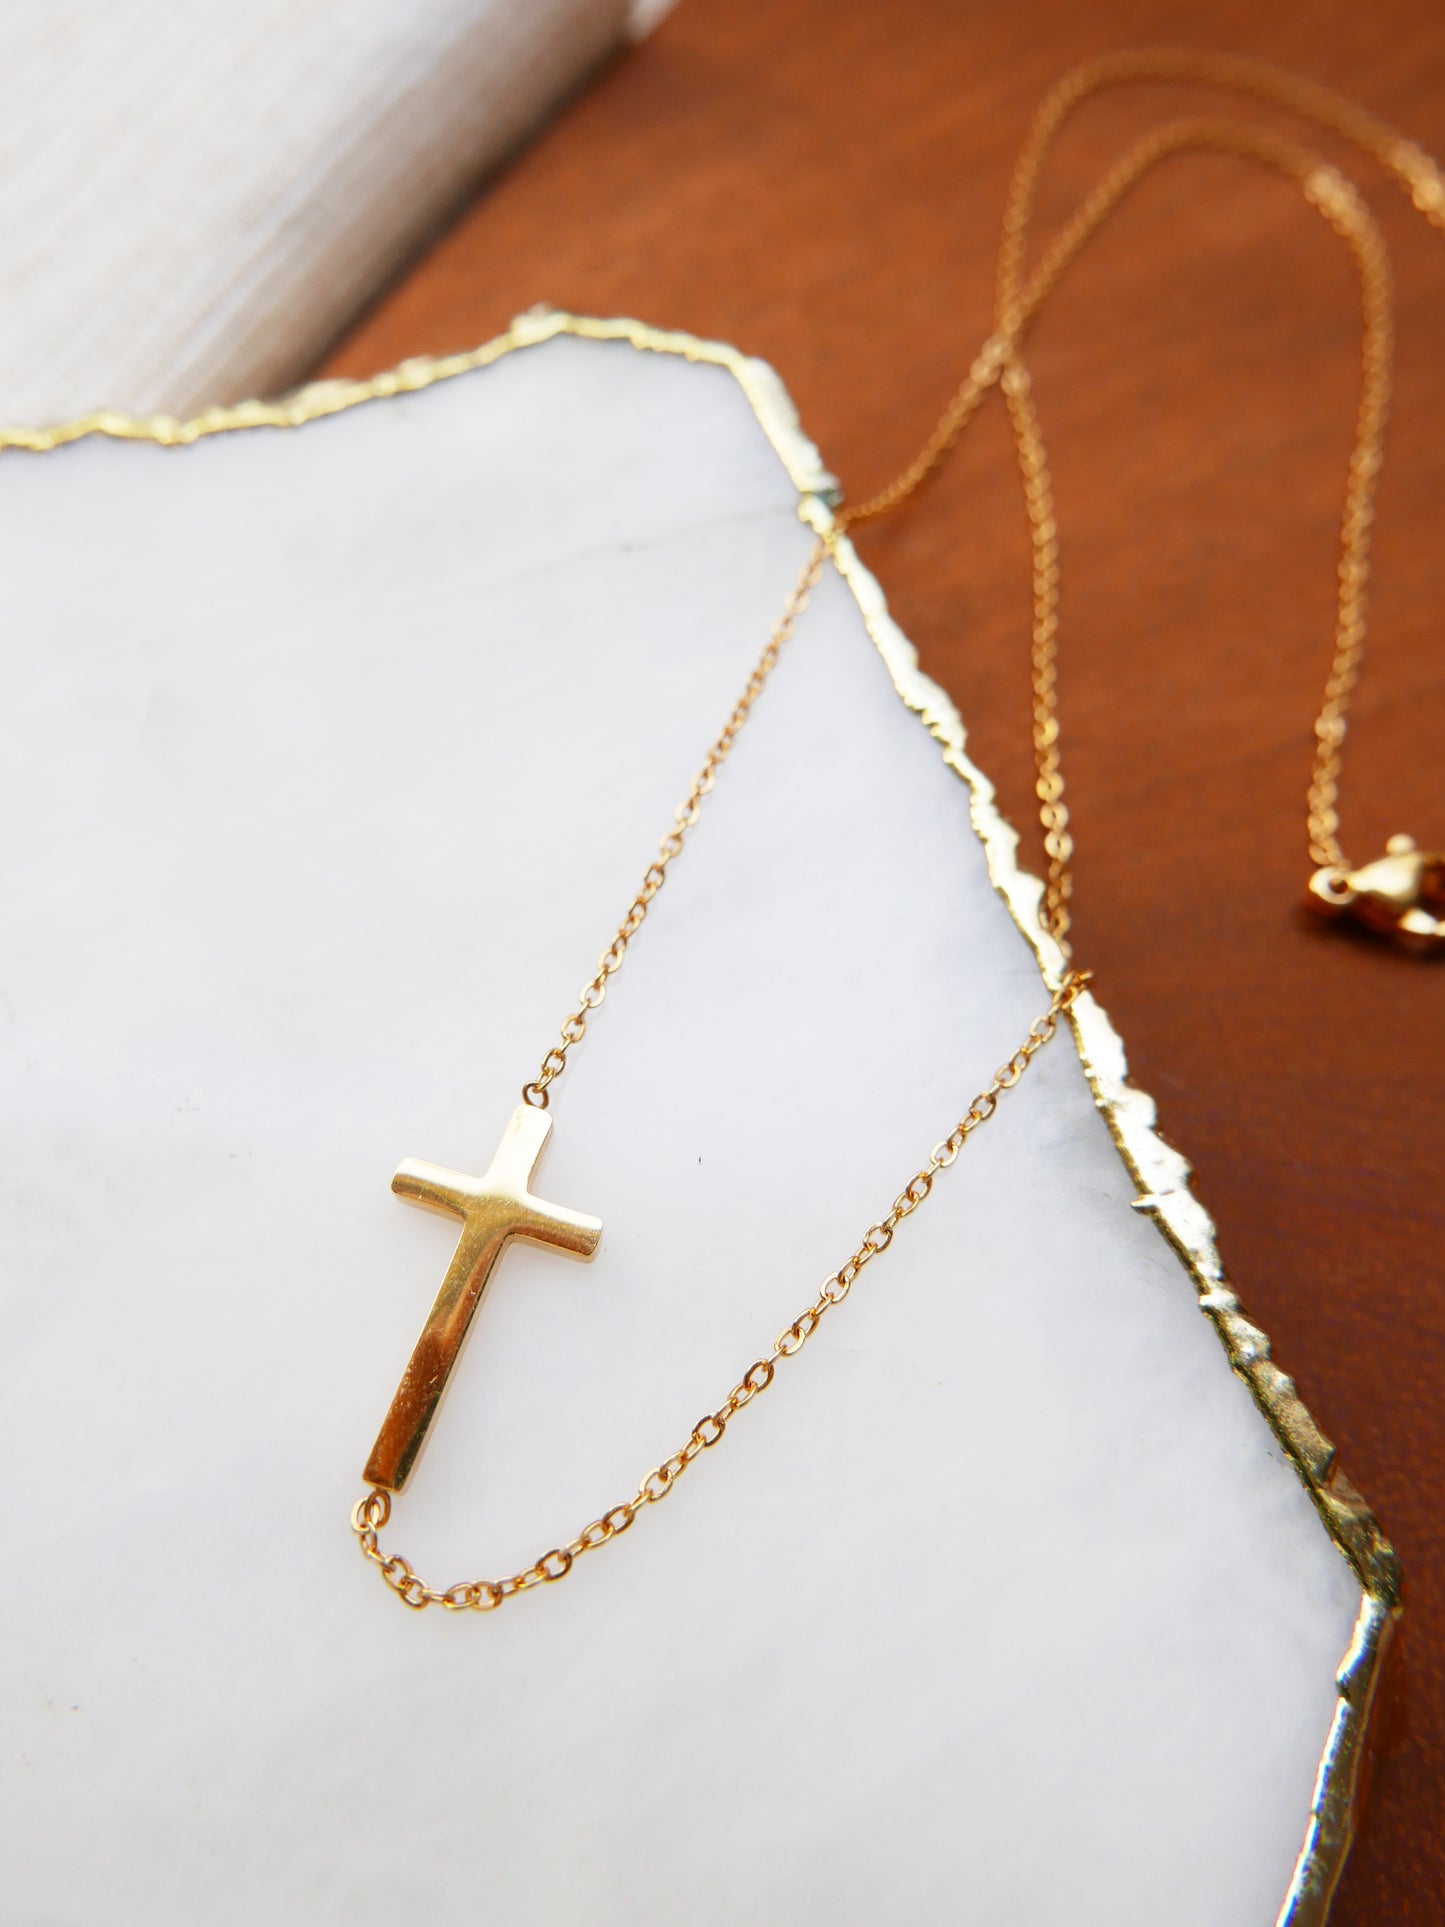 Daily Cross Necklace